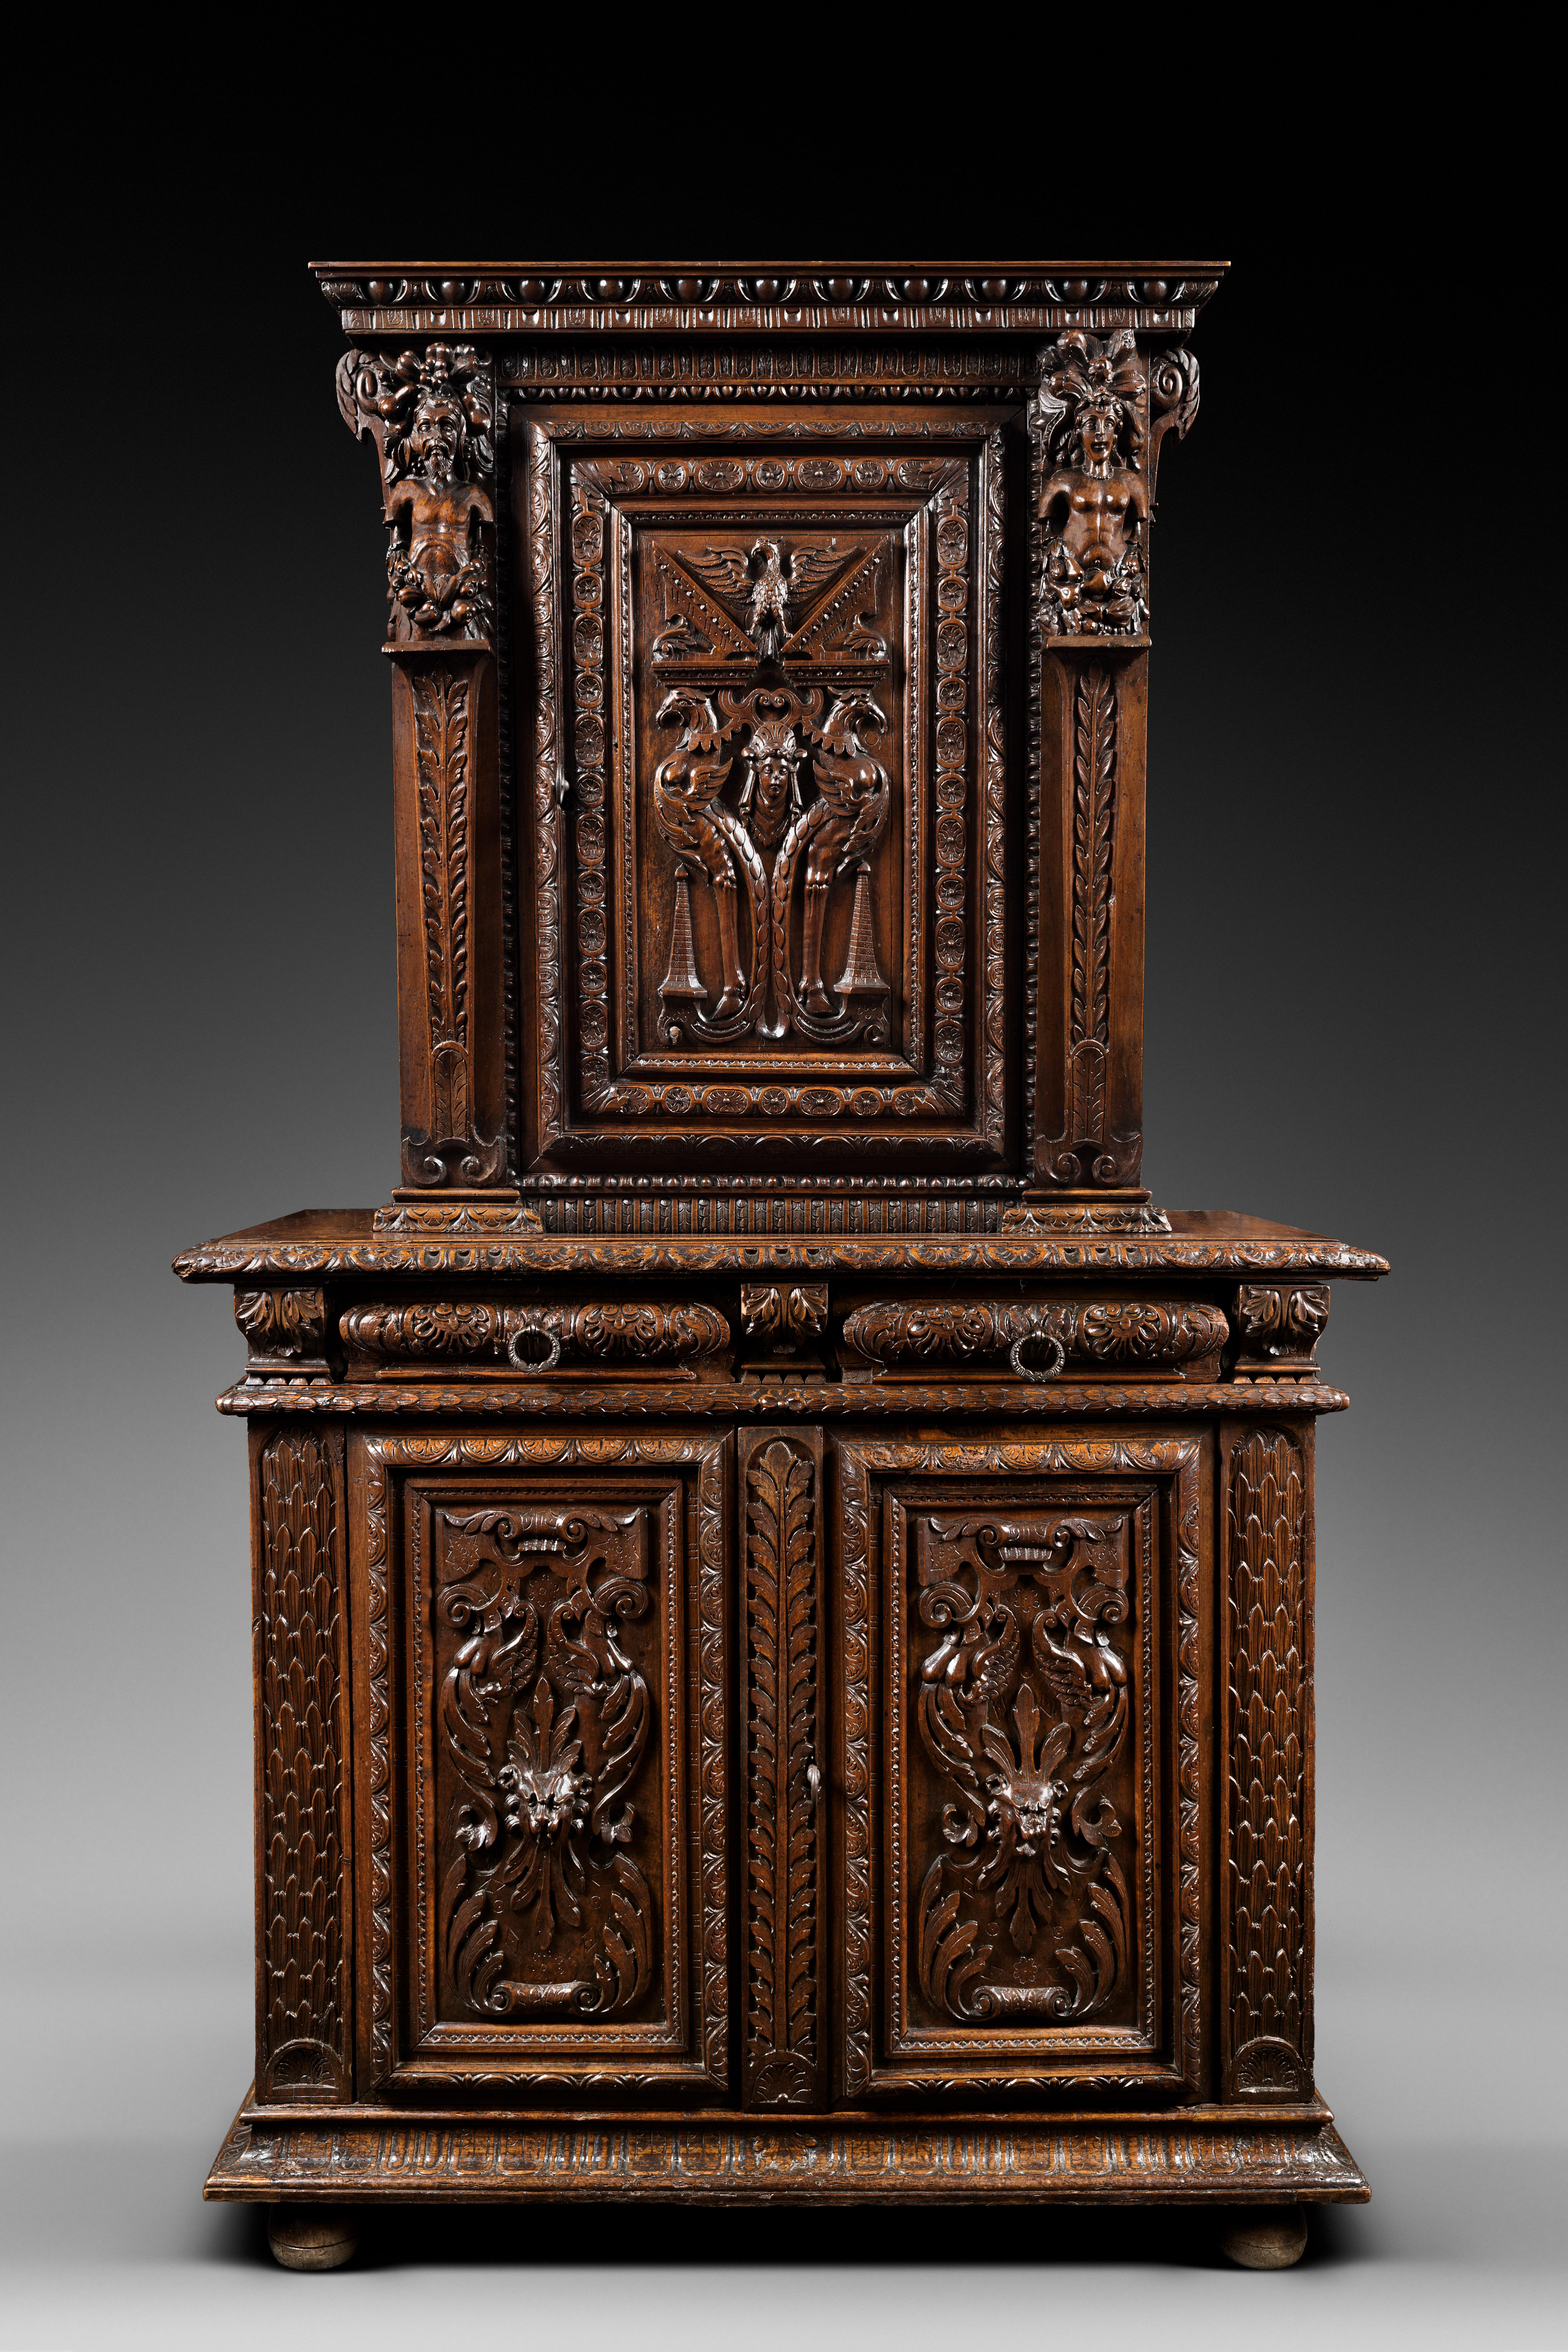 Rare carved Renaissance cabinet

Period : 2nd half 16th century, ca. 1570
Origin : France, Burgundy or Languedoc

This cabinet embody the production of the French second Renaissance with its balanced construction, its sober and elgant lines.